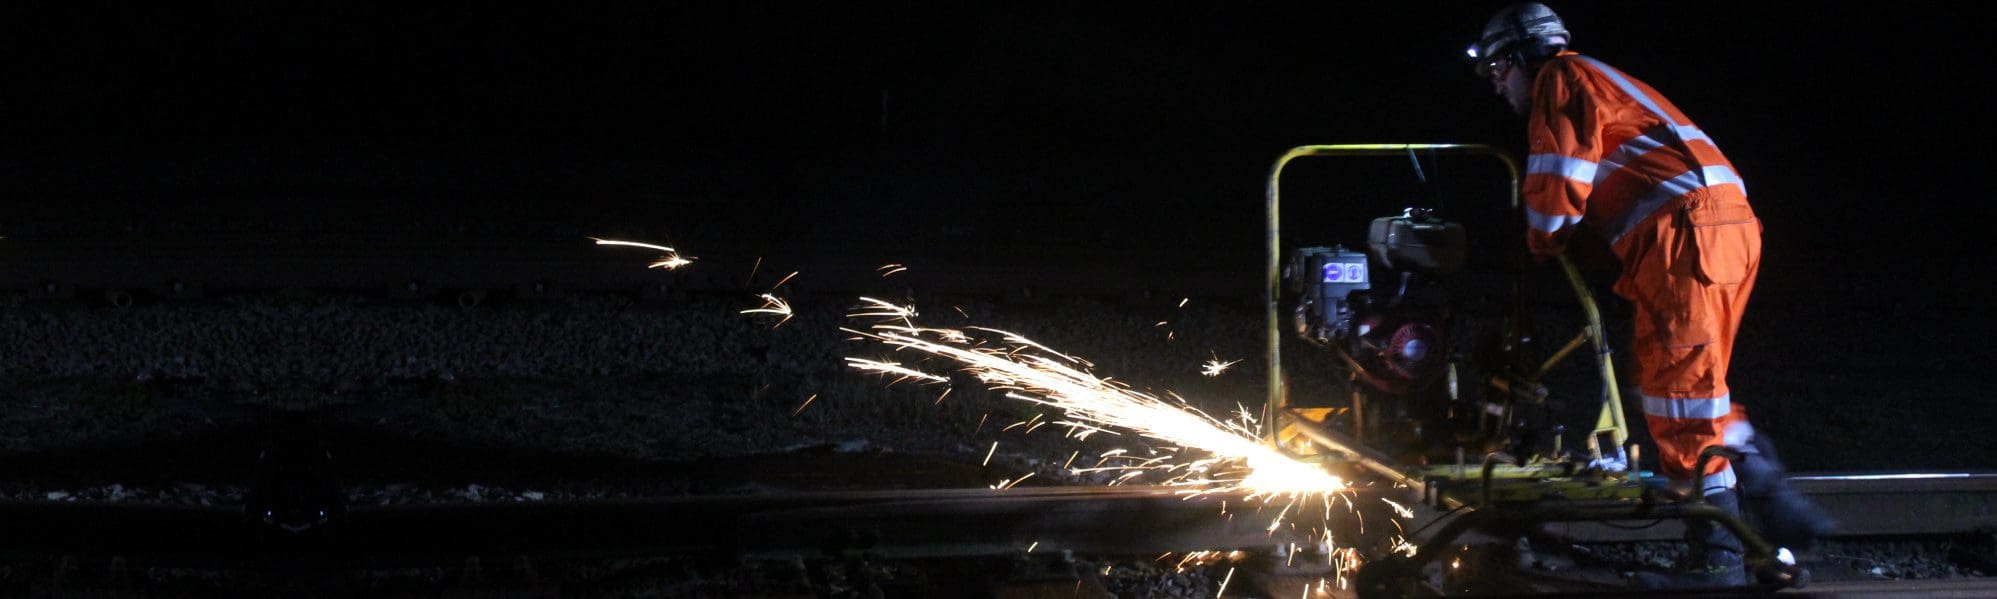 Rail worker in the dark, grinding with sparks flying